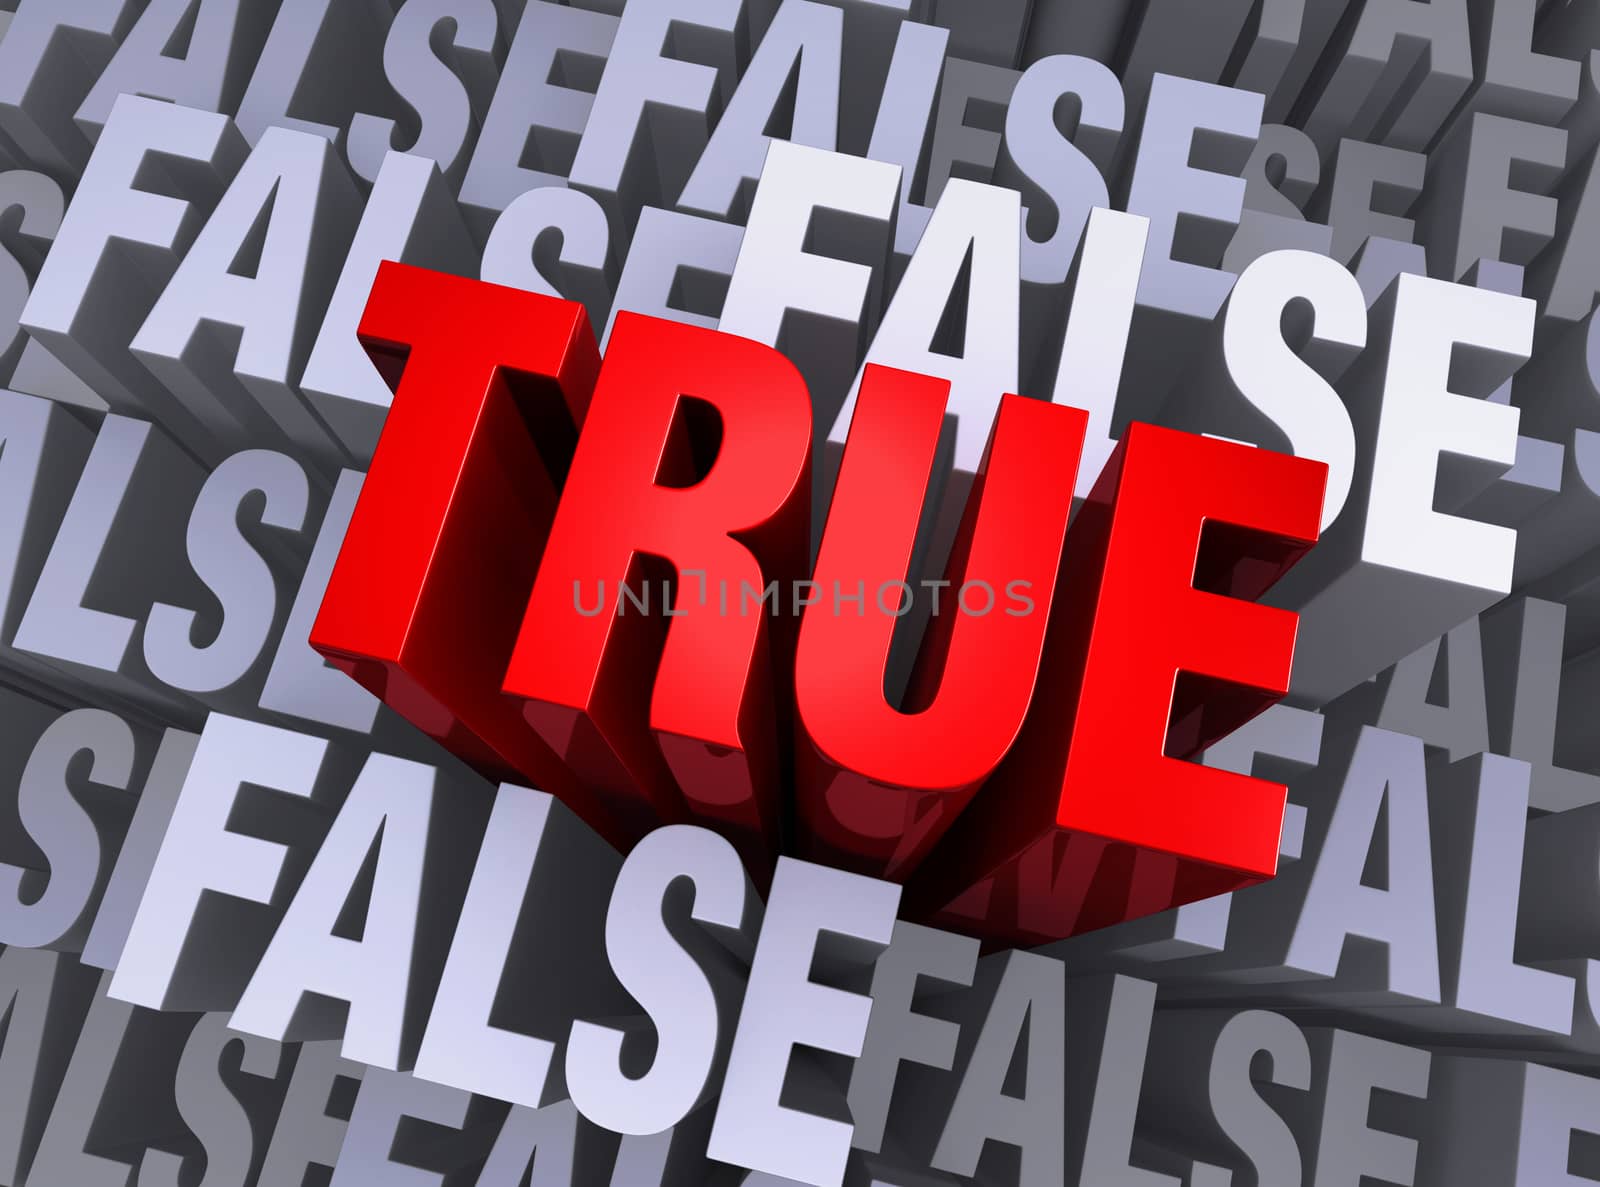 A bold, red "TRUE" emerges from a muted 3d background made up of multiple instances of the word "FALSE" 